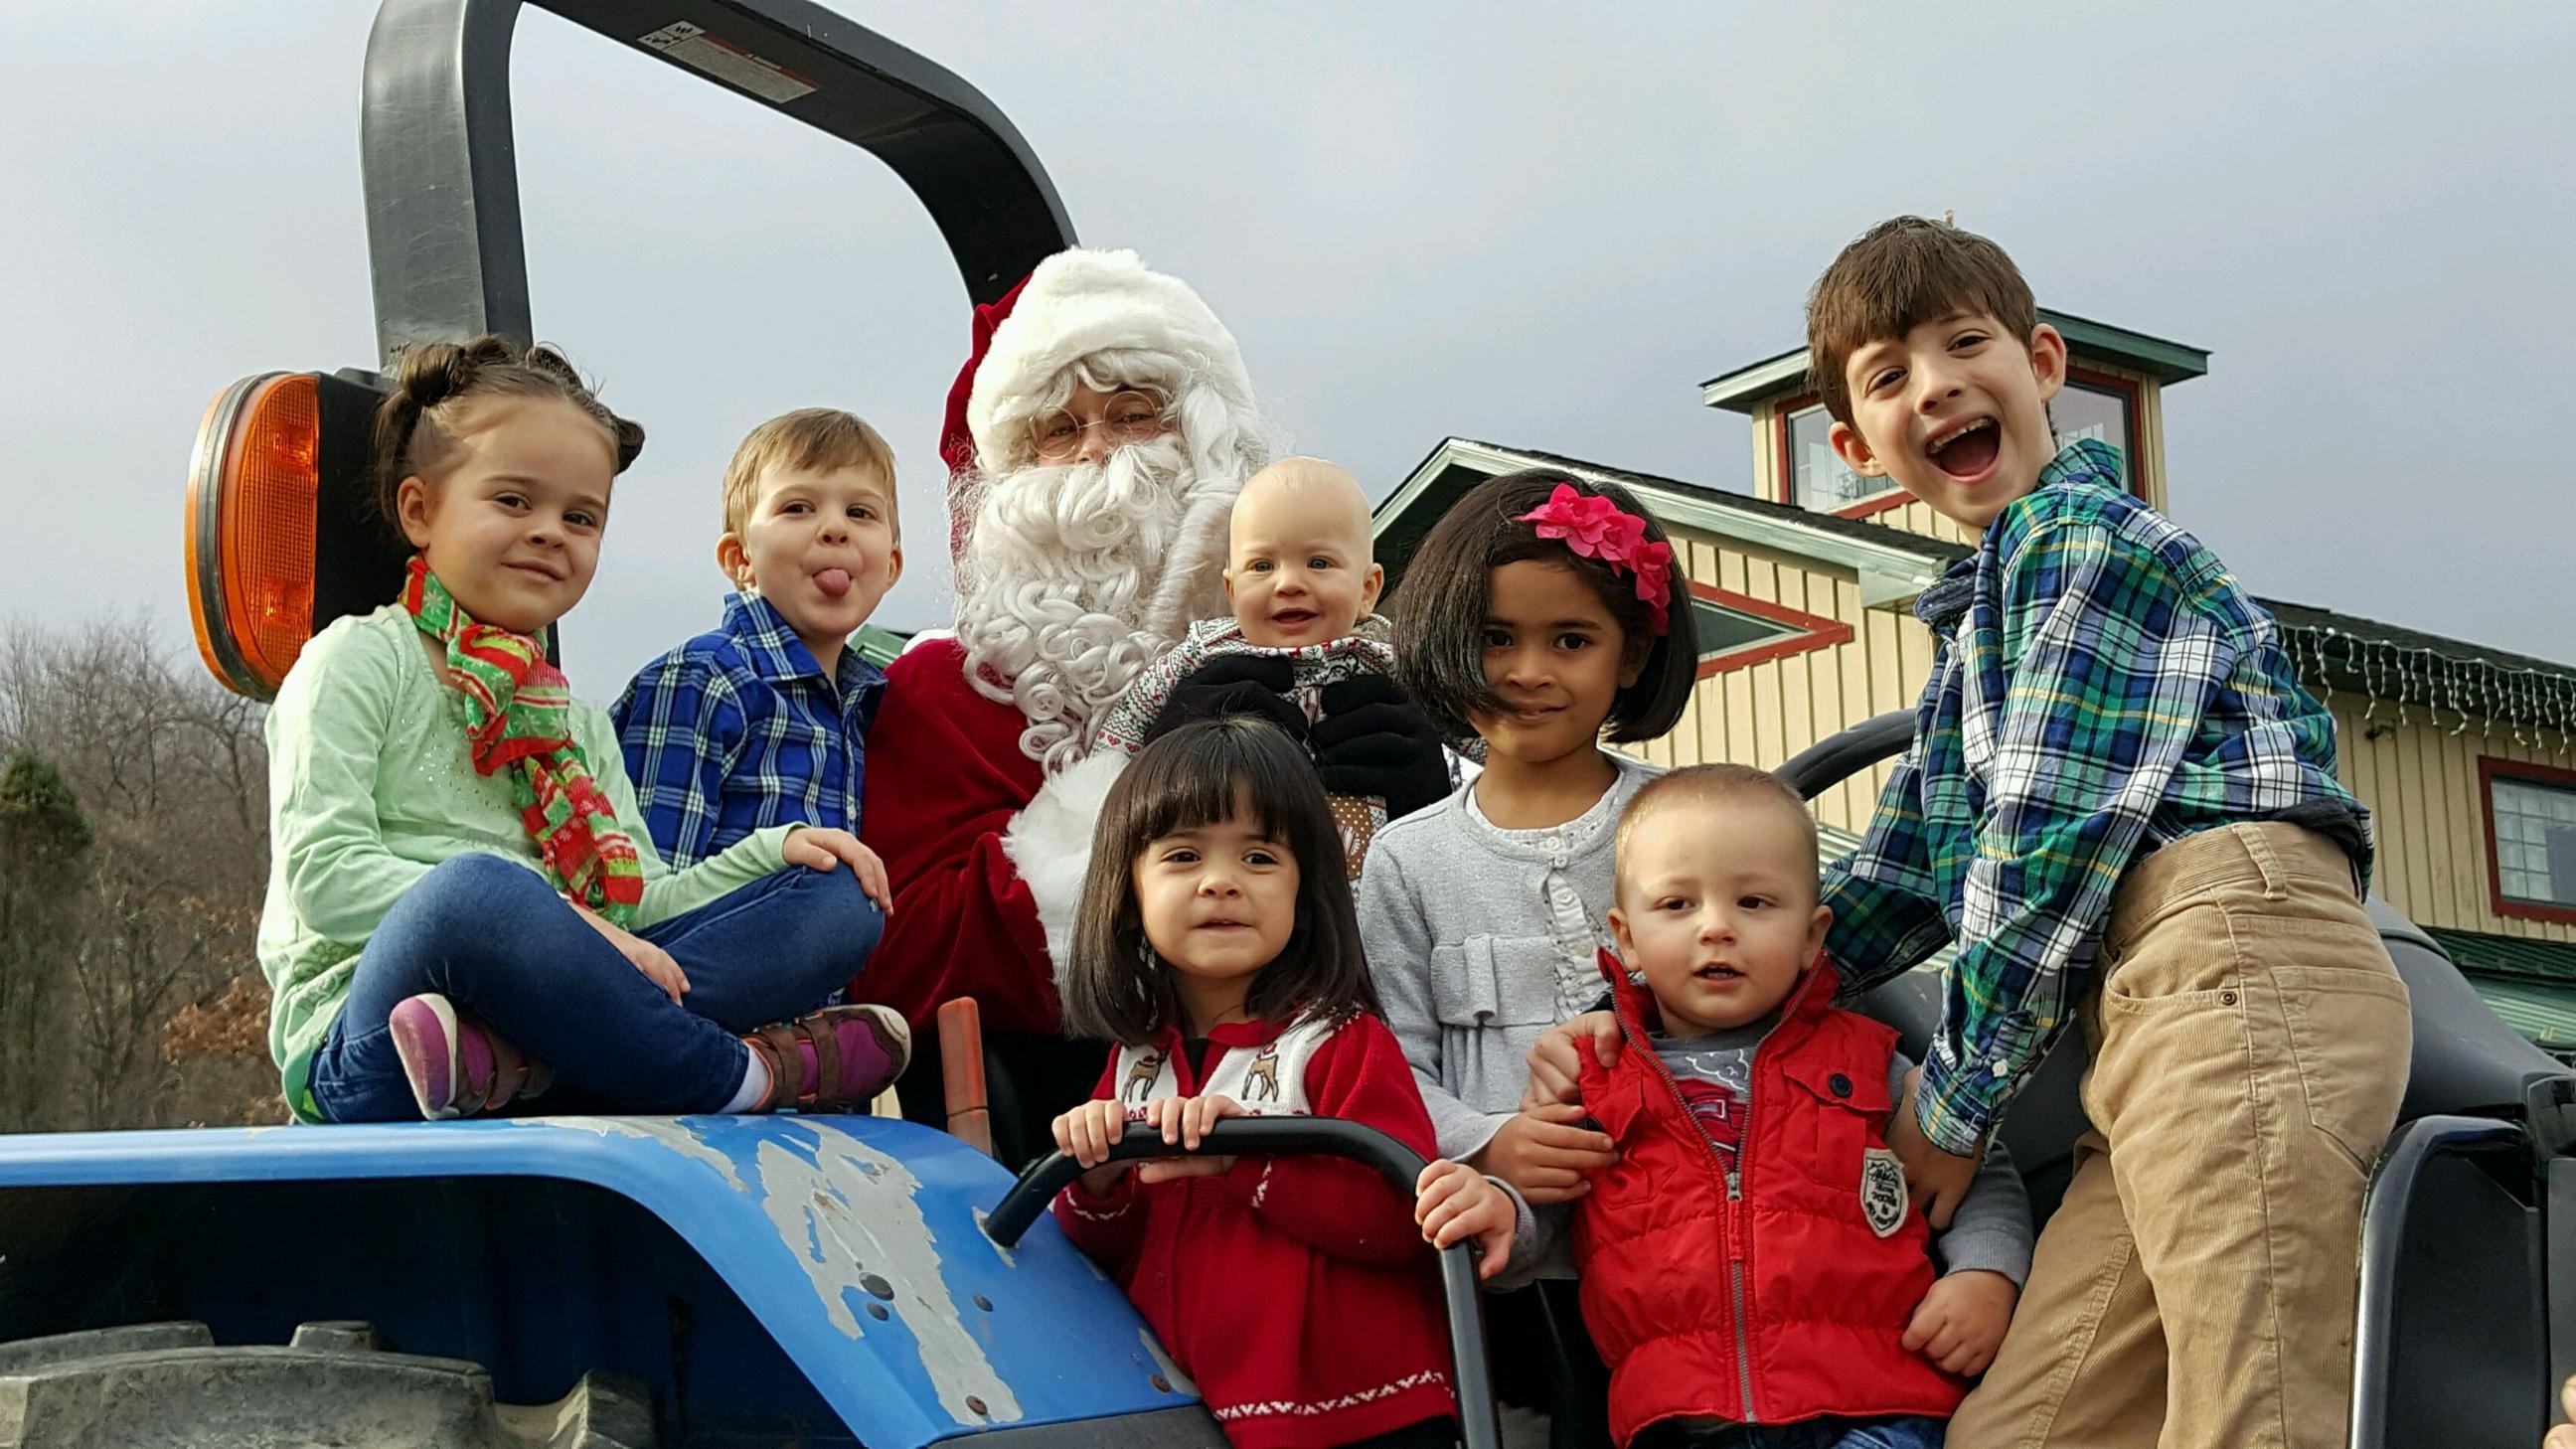 Next Happening: Santa On the Tractor